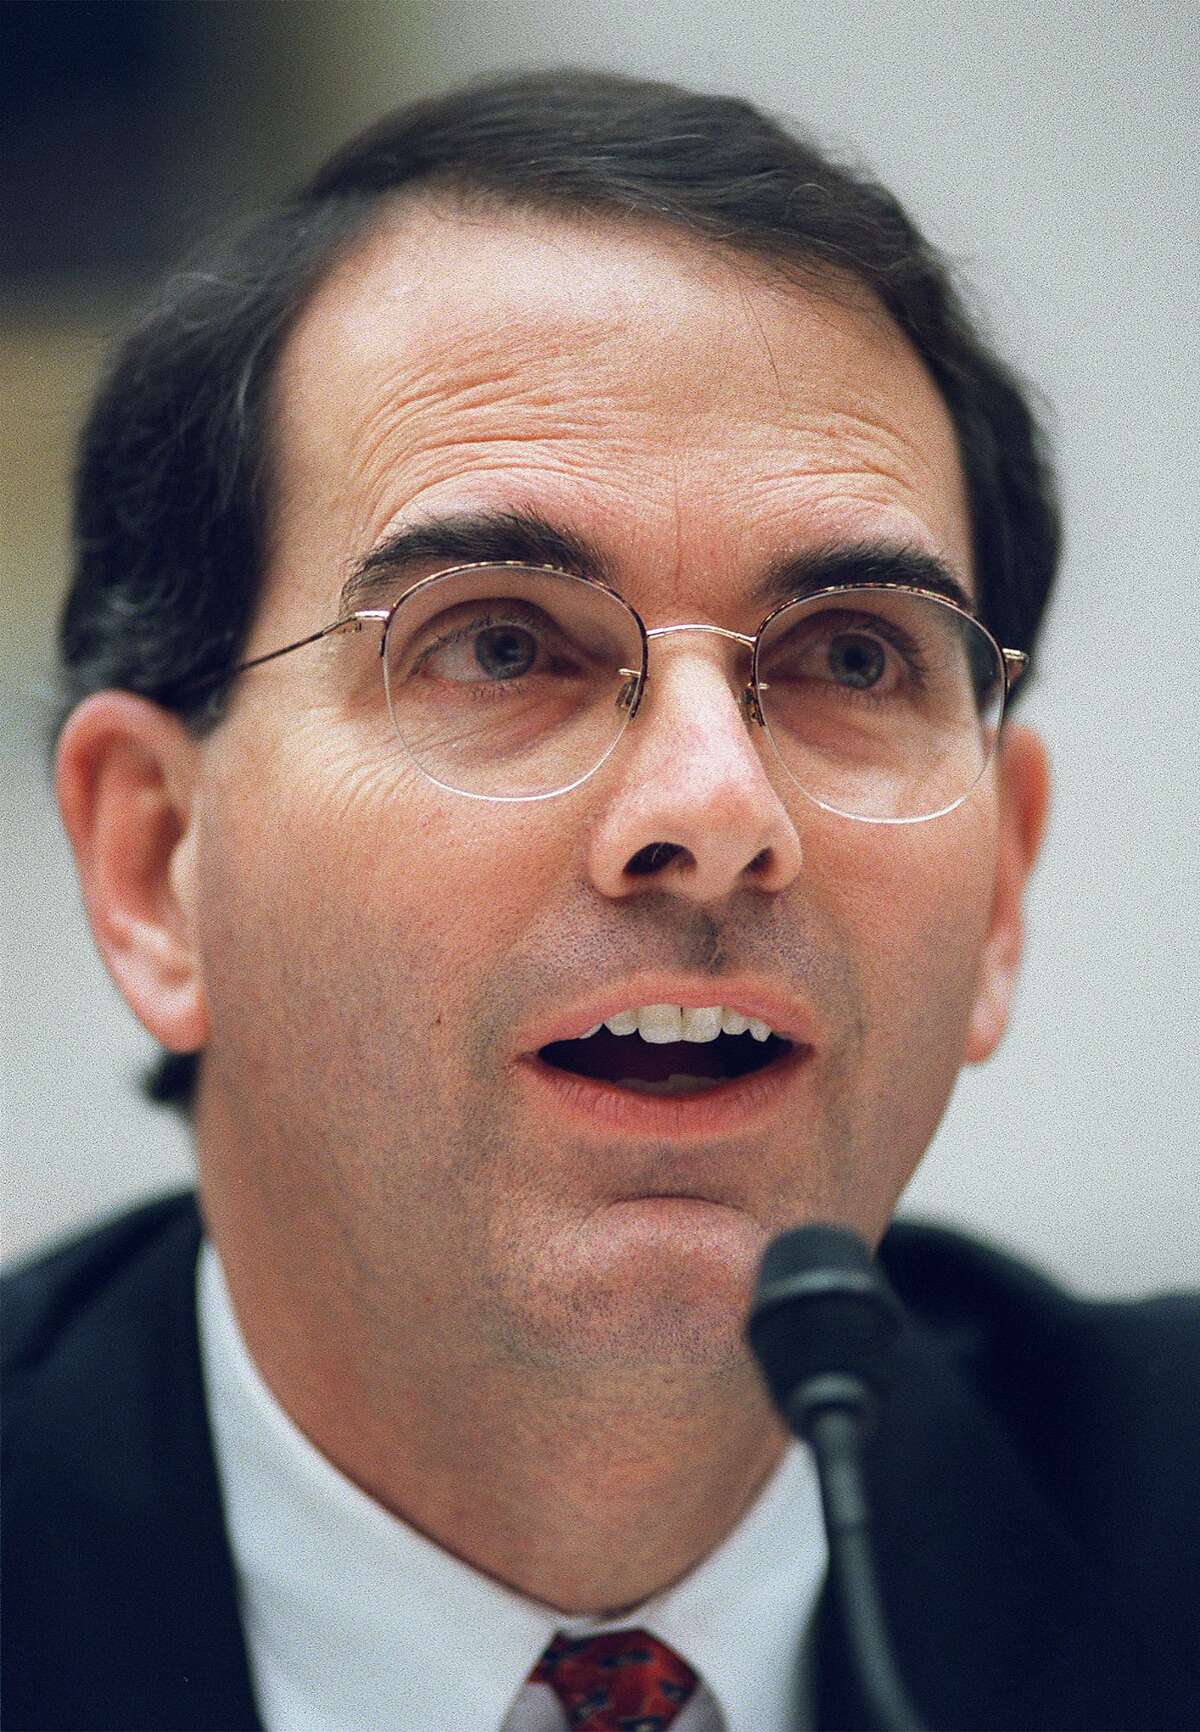 In this Feb. 14, 2002 file photo, Jay Bybee testifies before a congressional committee in Washington. Former Justice Department lawyers Jay Bybee and John Yoo showed "poor judgment" but did not commit professional misconduct when they authorized CIA interrogators to use waterboarding and other harsh tactics at the height of the U.S. war on terrorism, an internal review released Friday, Feb. 19, 2010 found. (AP Photo/Evan Vucci, File)